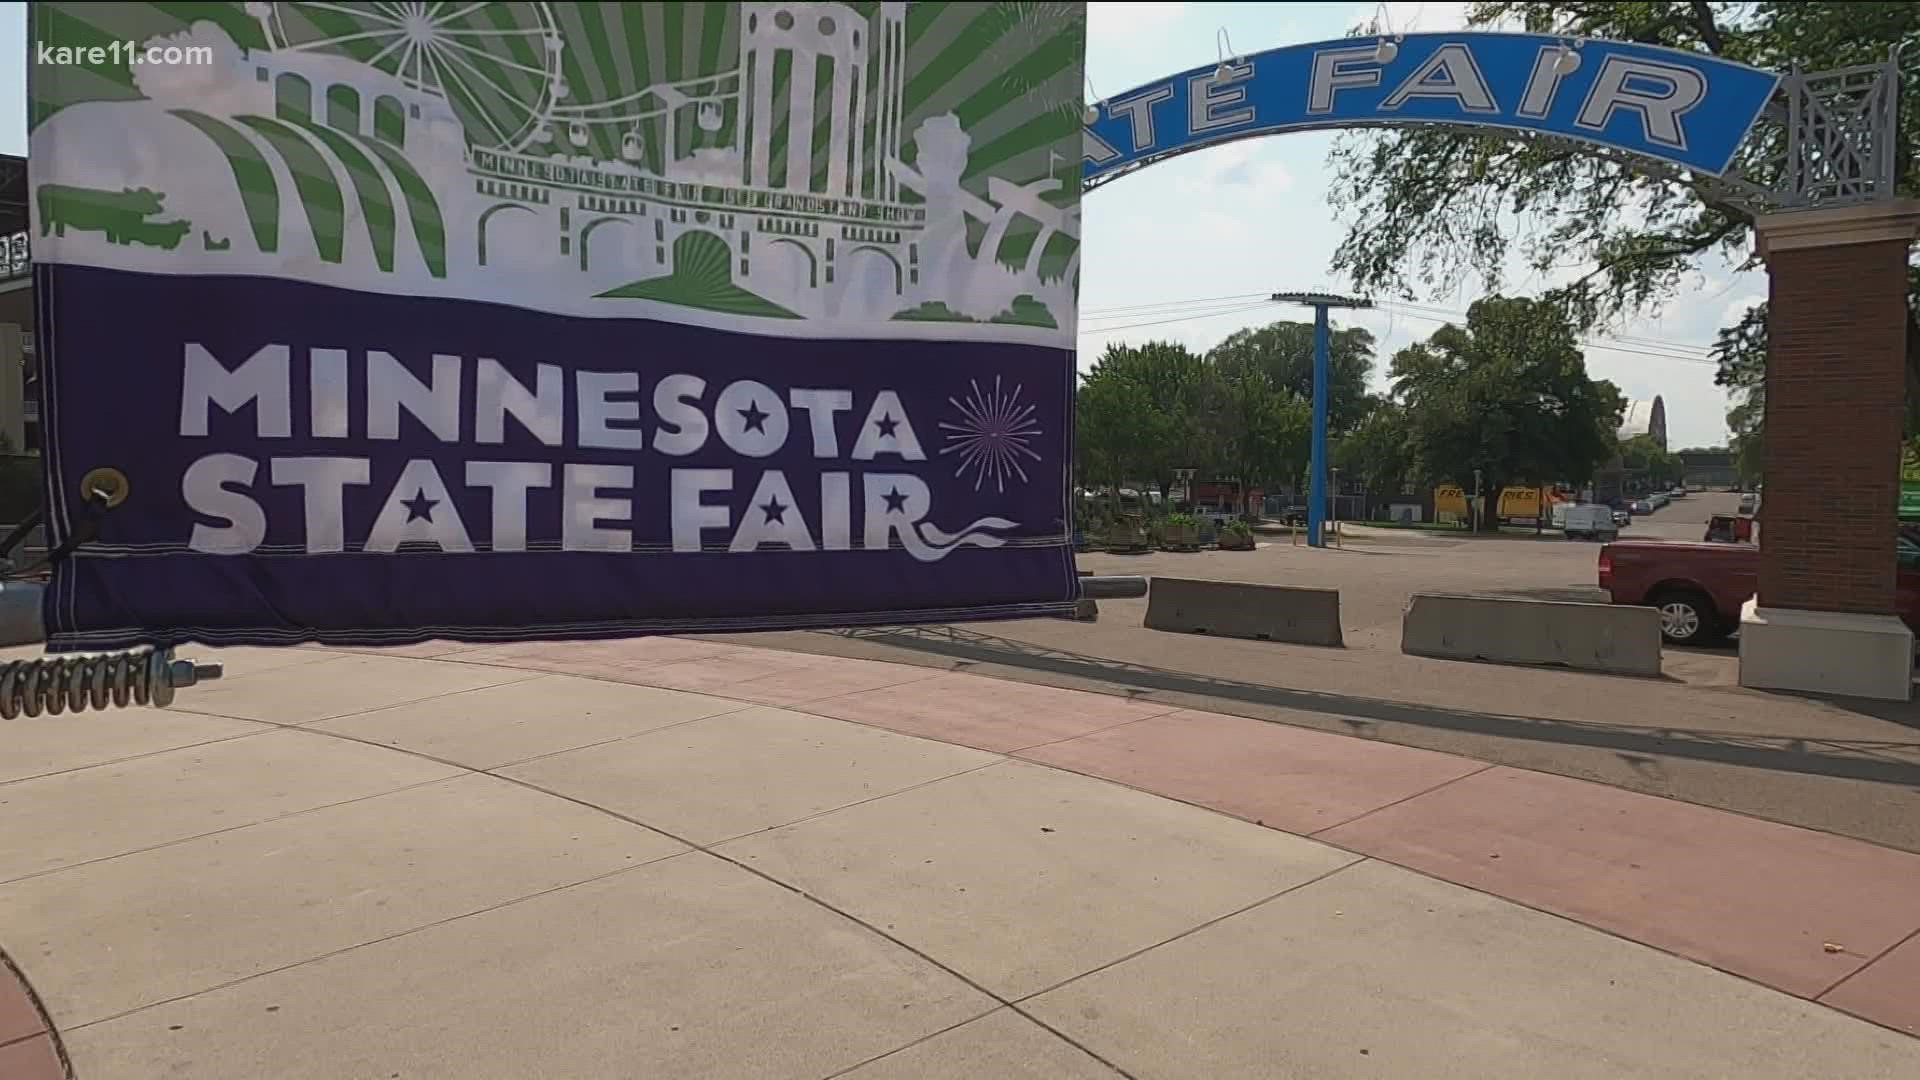 There are mixed emotions about the state fair this year, but for those who mark it on the calendar, getting on the grounds will feel good.